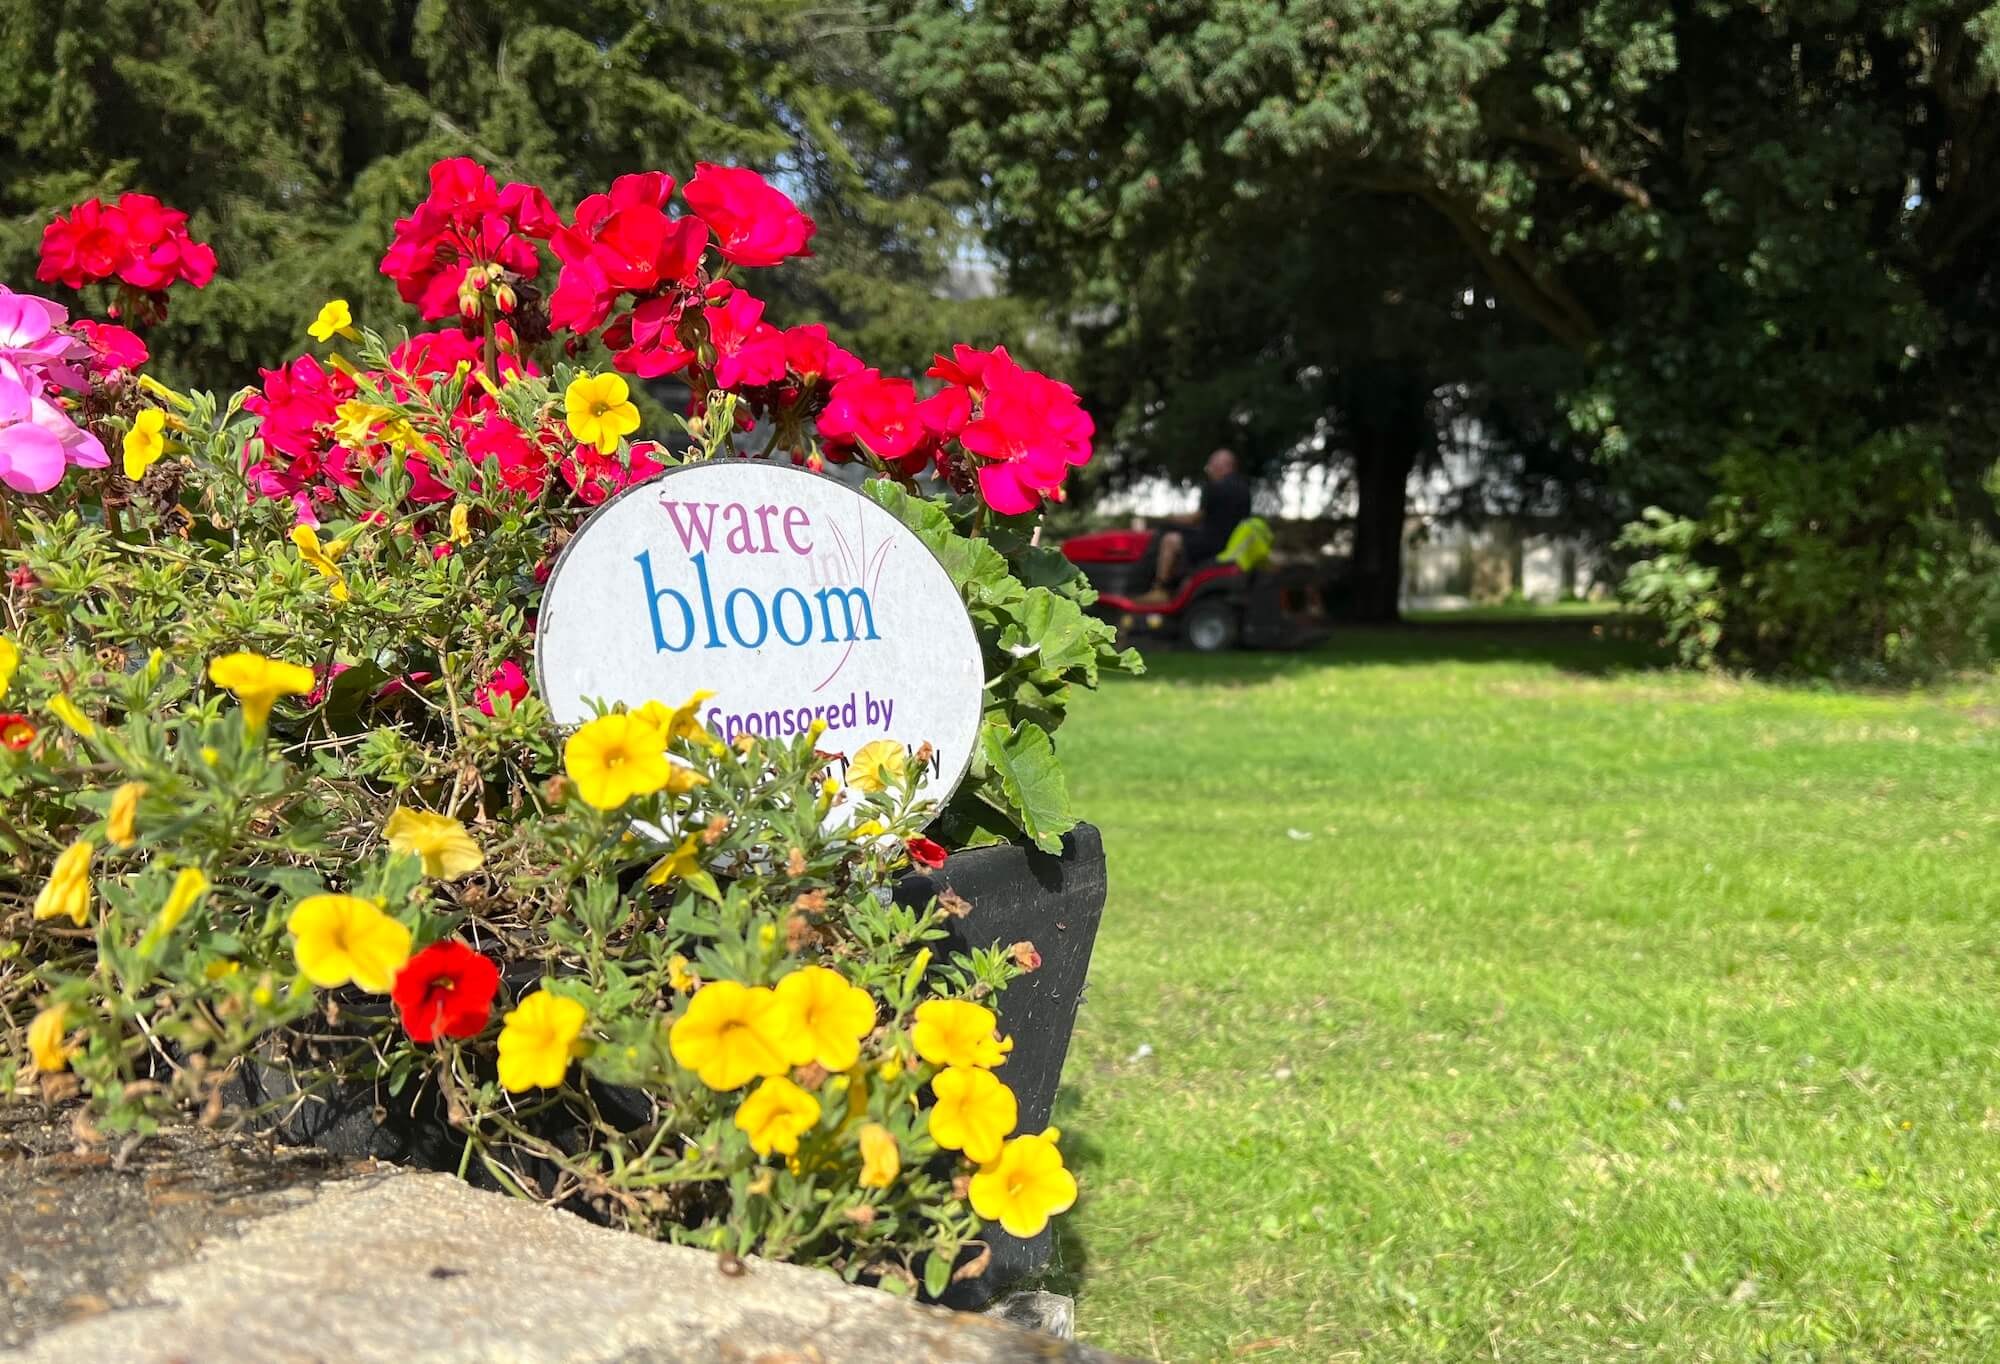 Ware in Bloom logo on a church flower box